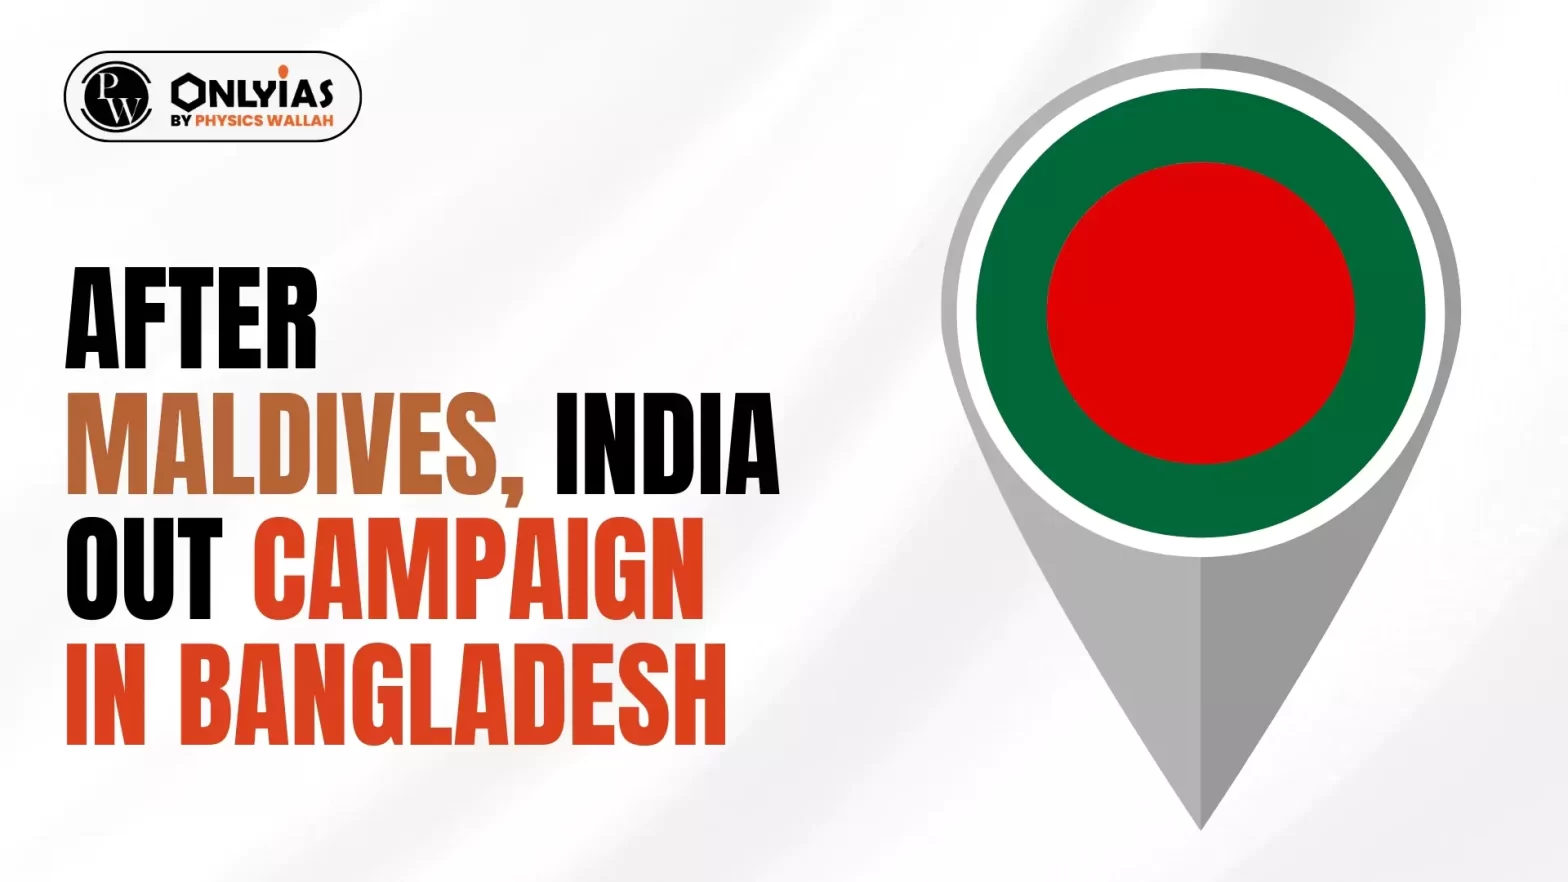 After Maldives, India Out Campaign in Bangladesh